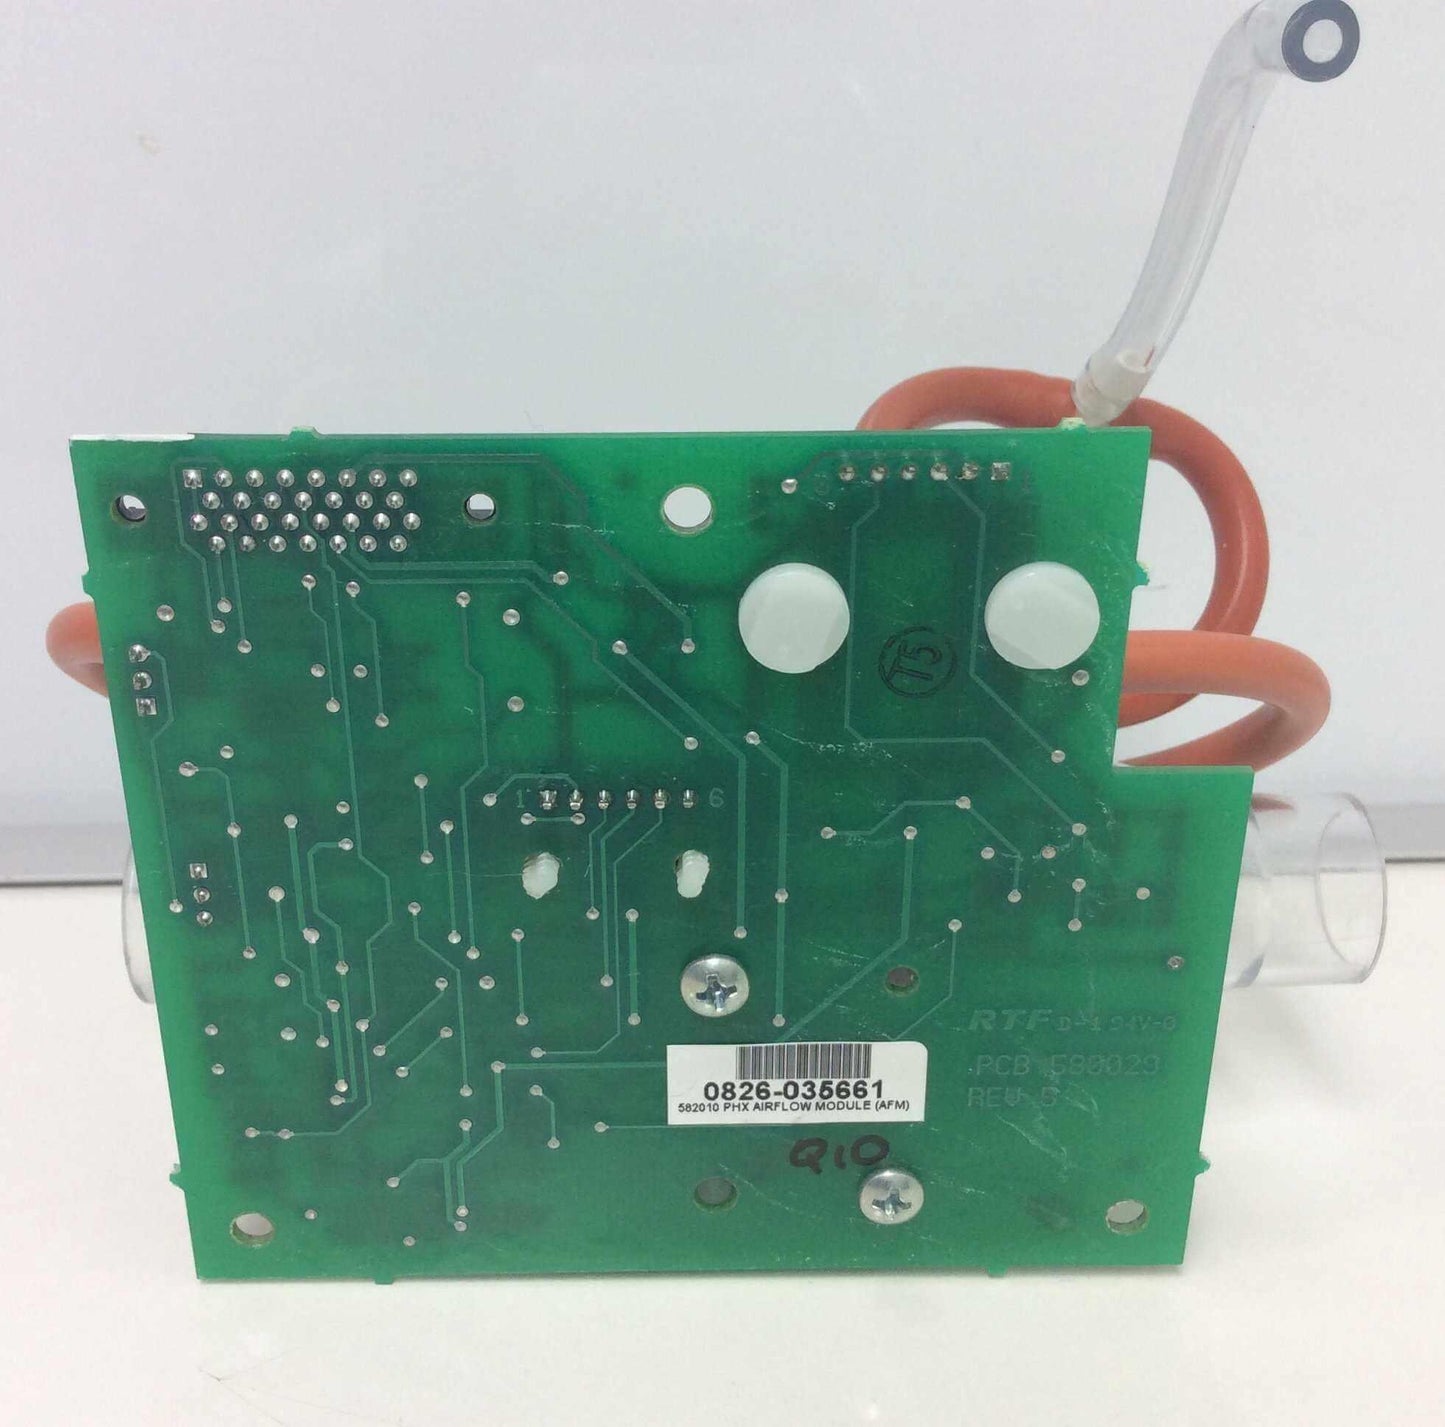 Used Philips Respironics 0826-035661 Replacement PHX Airflow Module PCB Board 582010 1202625 - MBR Medicals